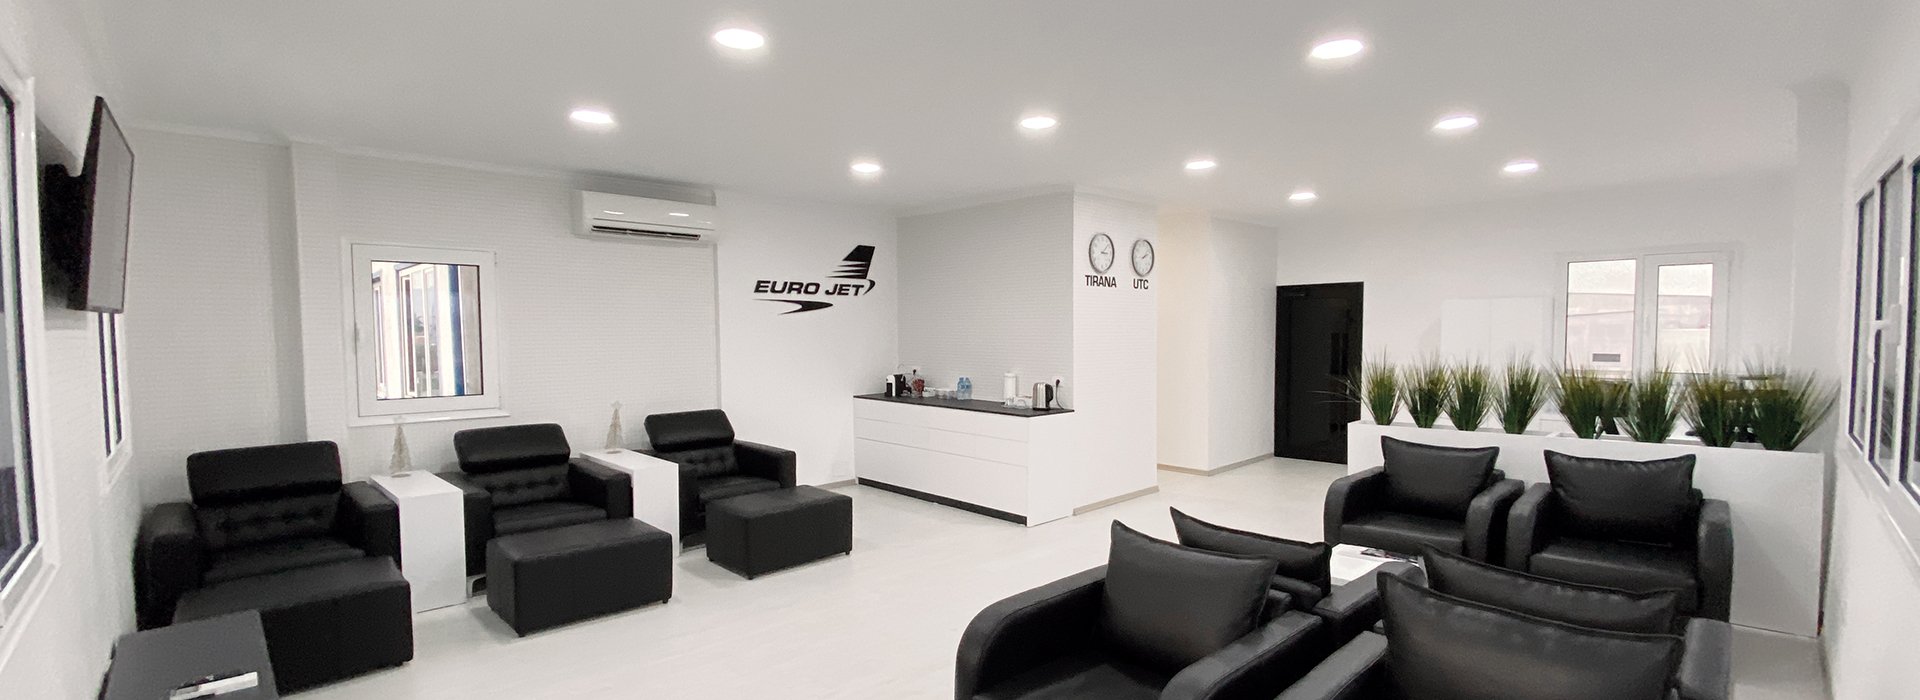 VIP Crew Lounges | Flight Support Services, Ground Handling Support, Jet Fuel